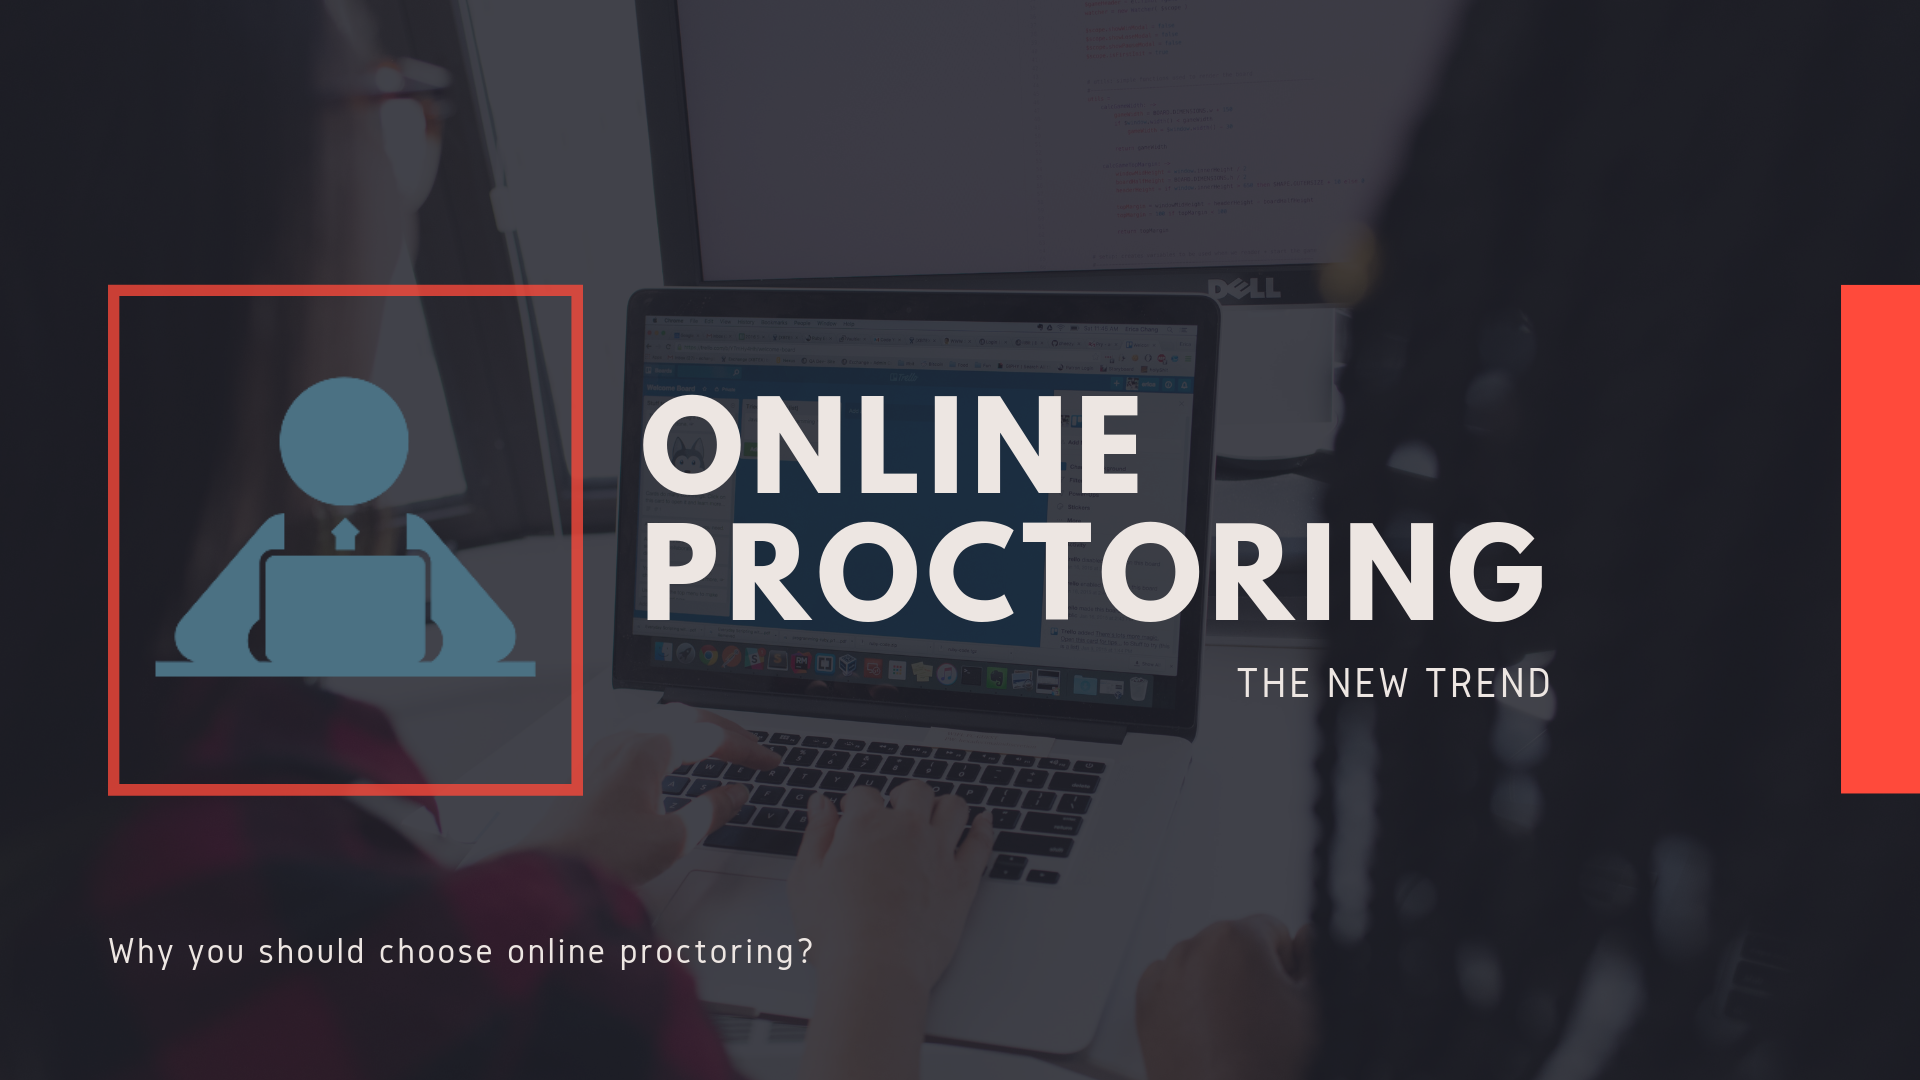 Online-Proctoring-is-the-new-Trend.png